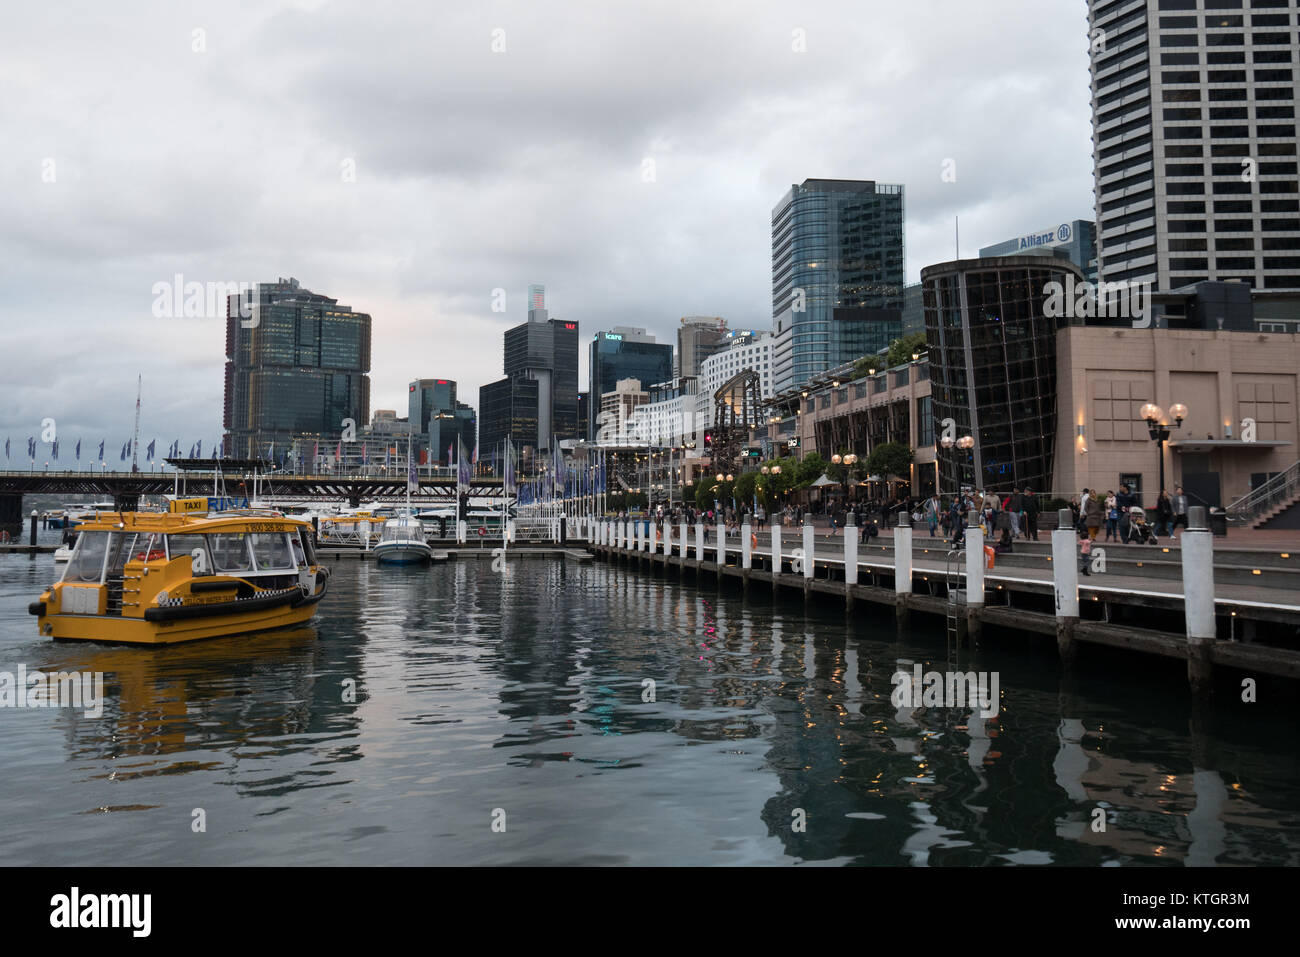 harbourside shopping mall in sydney darling harbour Stock Photo